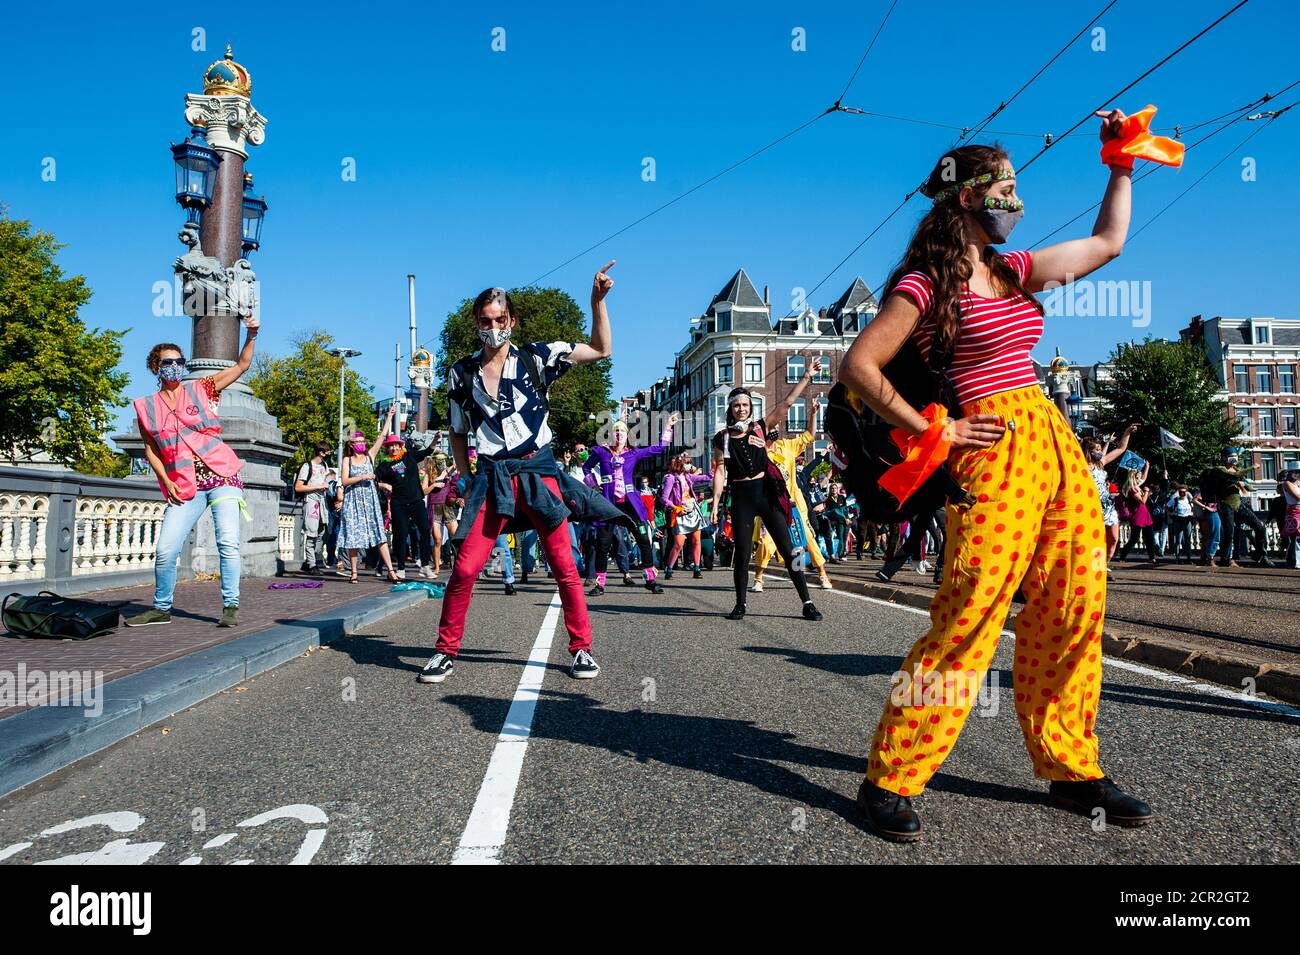 A group of climate activists are seen dancing during the rally.During the whole month, the climate activists group Extinction Rebellion in The Netherlands has planned a new campaign called 'September Rebellion' to draw attention to the climate and ecological crisis. At the Museumplein, in Amsterdam, hundreds of XR activists danced to demand action against climate change in what protesters dubbed “civil disco-bedience”. Activists waved flags and danced to songs including the Bee Gees’ 1977 hit, Stayin’ Alive. After the Museumplein the activists blocked for a few minutes one of the most importan Stock Photo